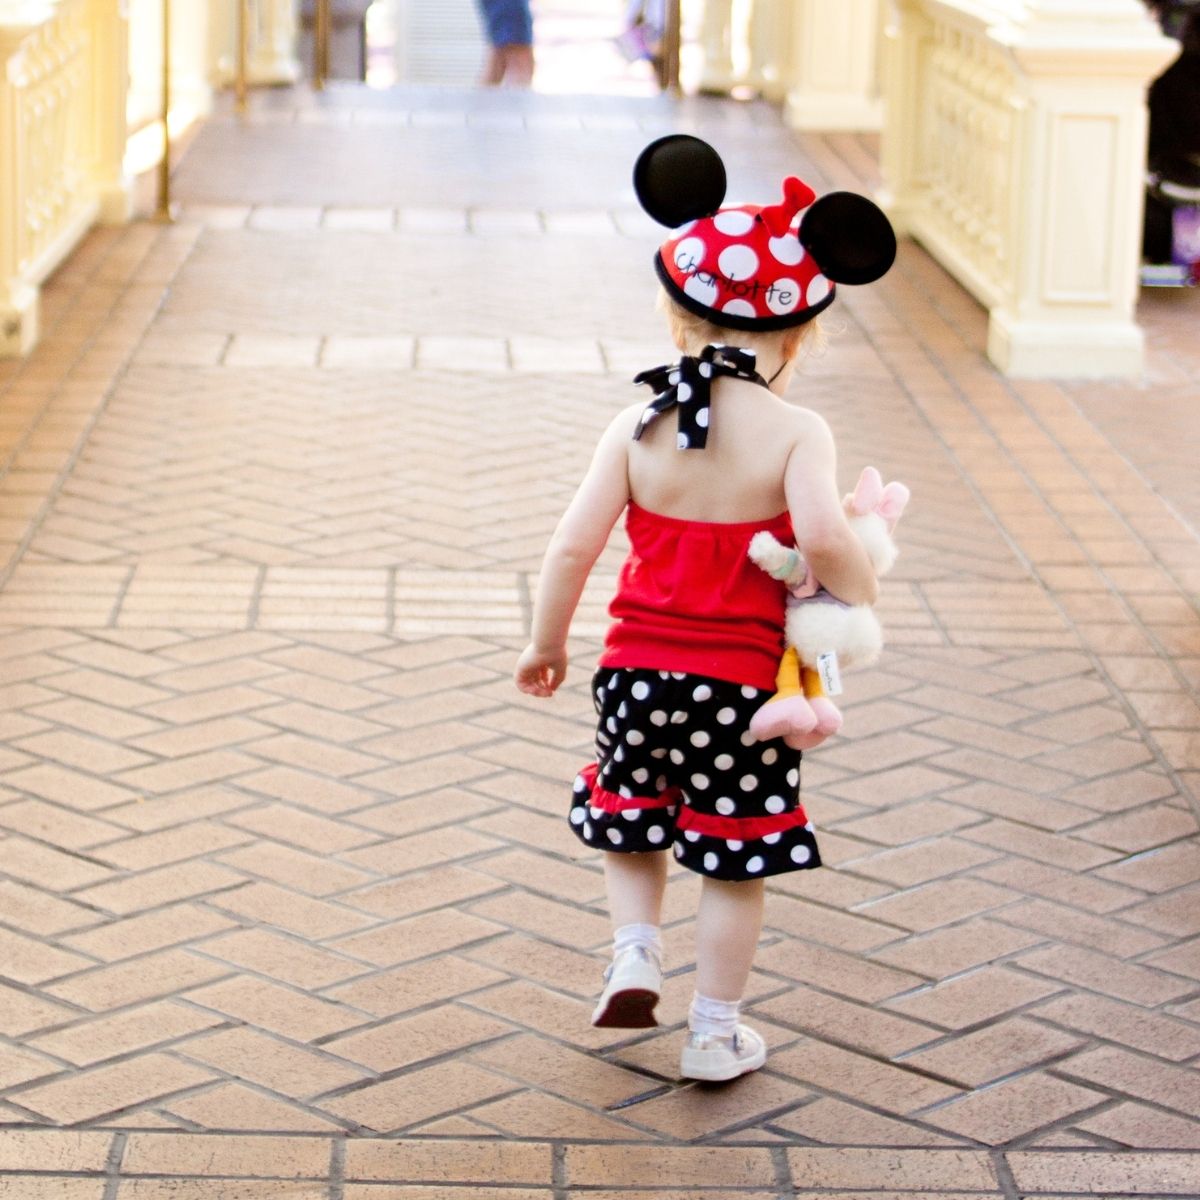 A young toddler wearing Minnie Mouse ears and a Disney outfit is walking away from the camera.